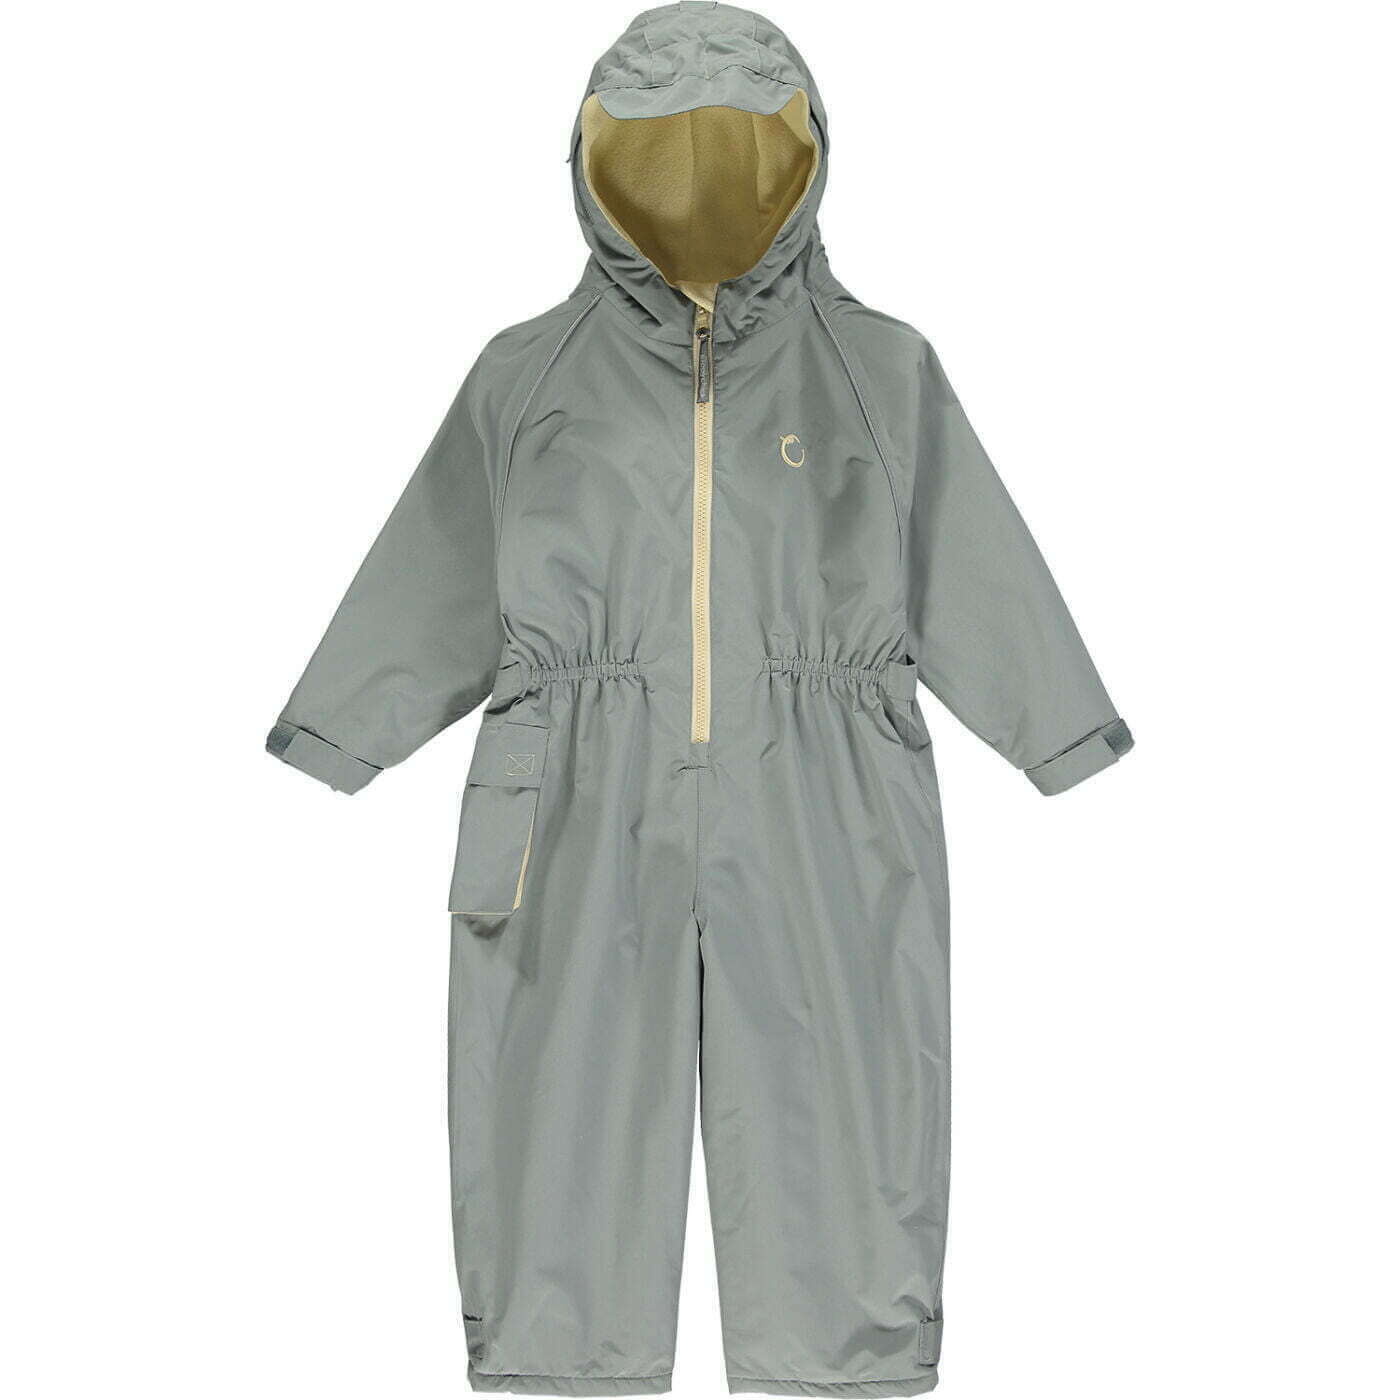 The Hippychick toddler waterproof suit is fleece lined and has been designed to be completely windproof and breathable, ensuring complete comfort and protection in all weathers.